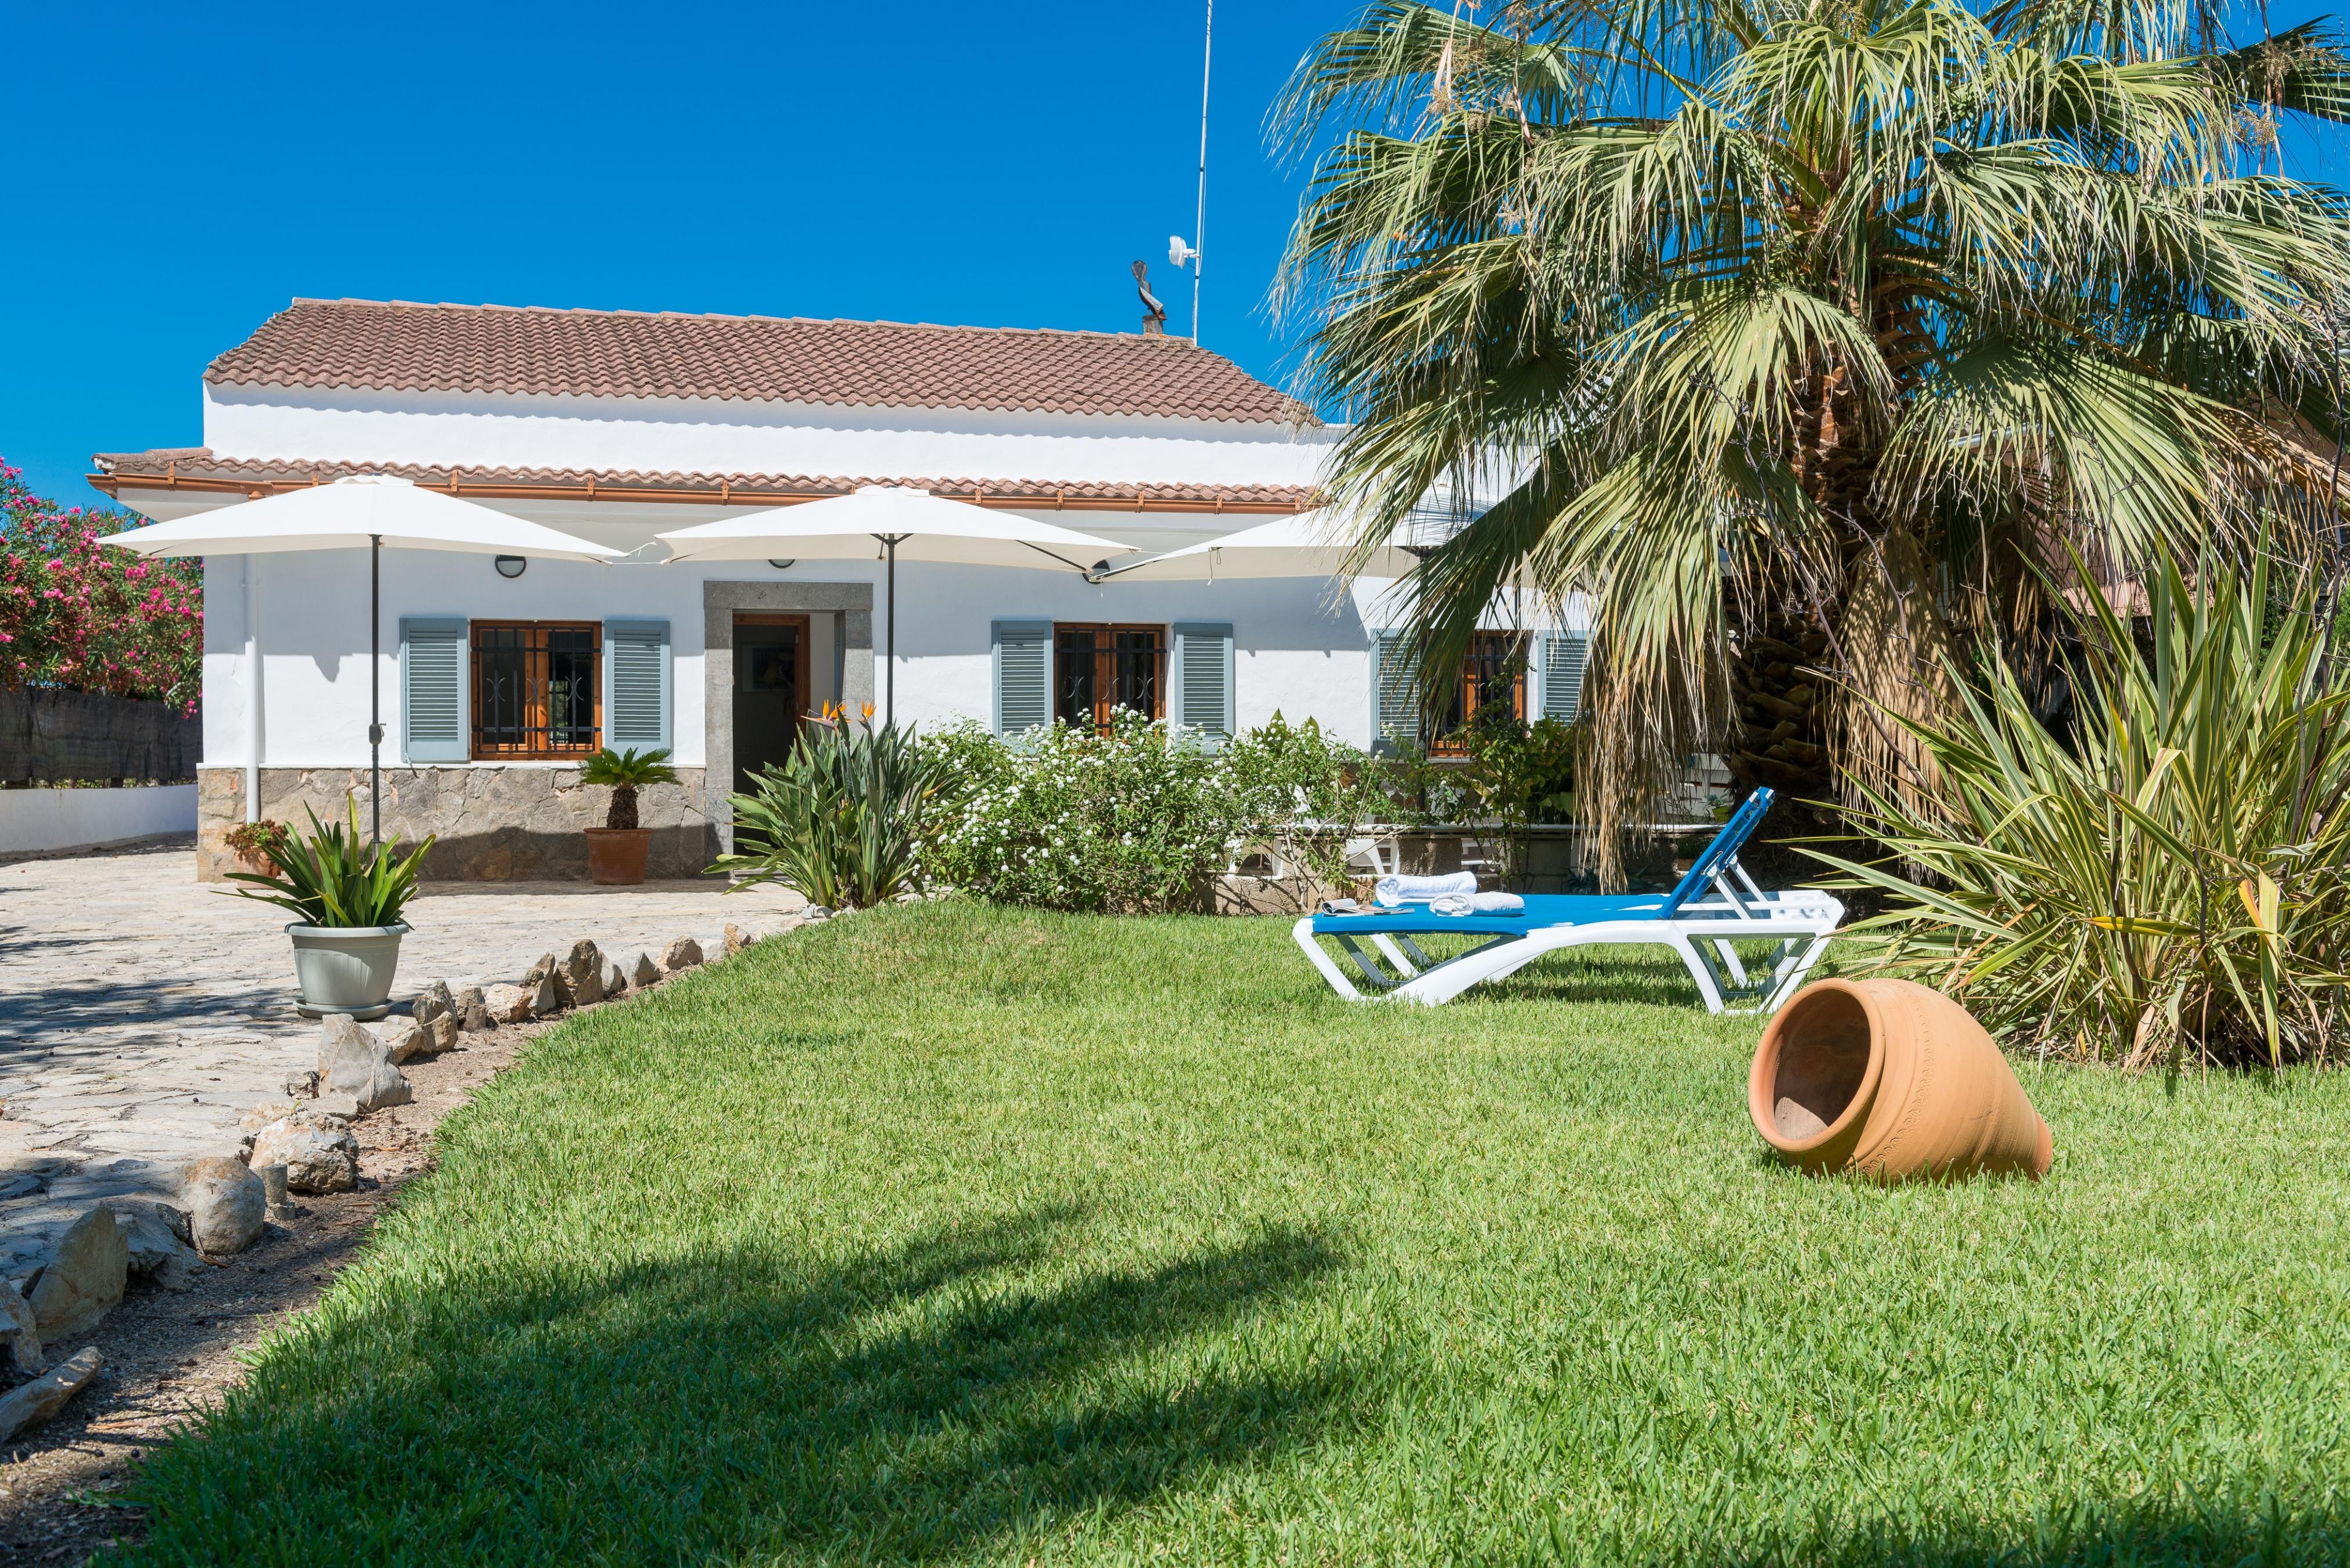 Property Image 1 - CAN BLAU - Cosy chalet with garden and terraces near the beach. Free WiFi